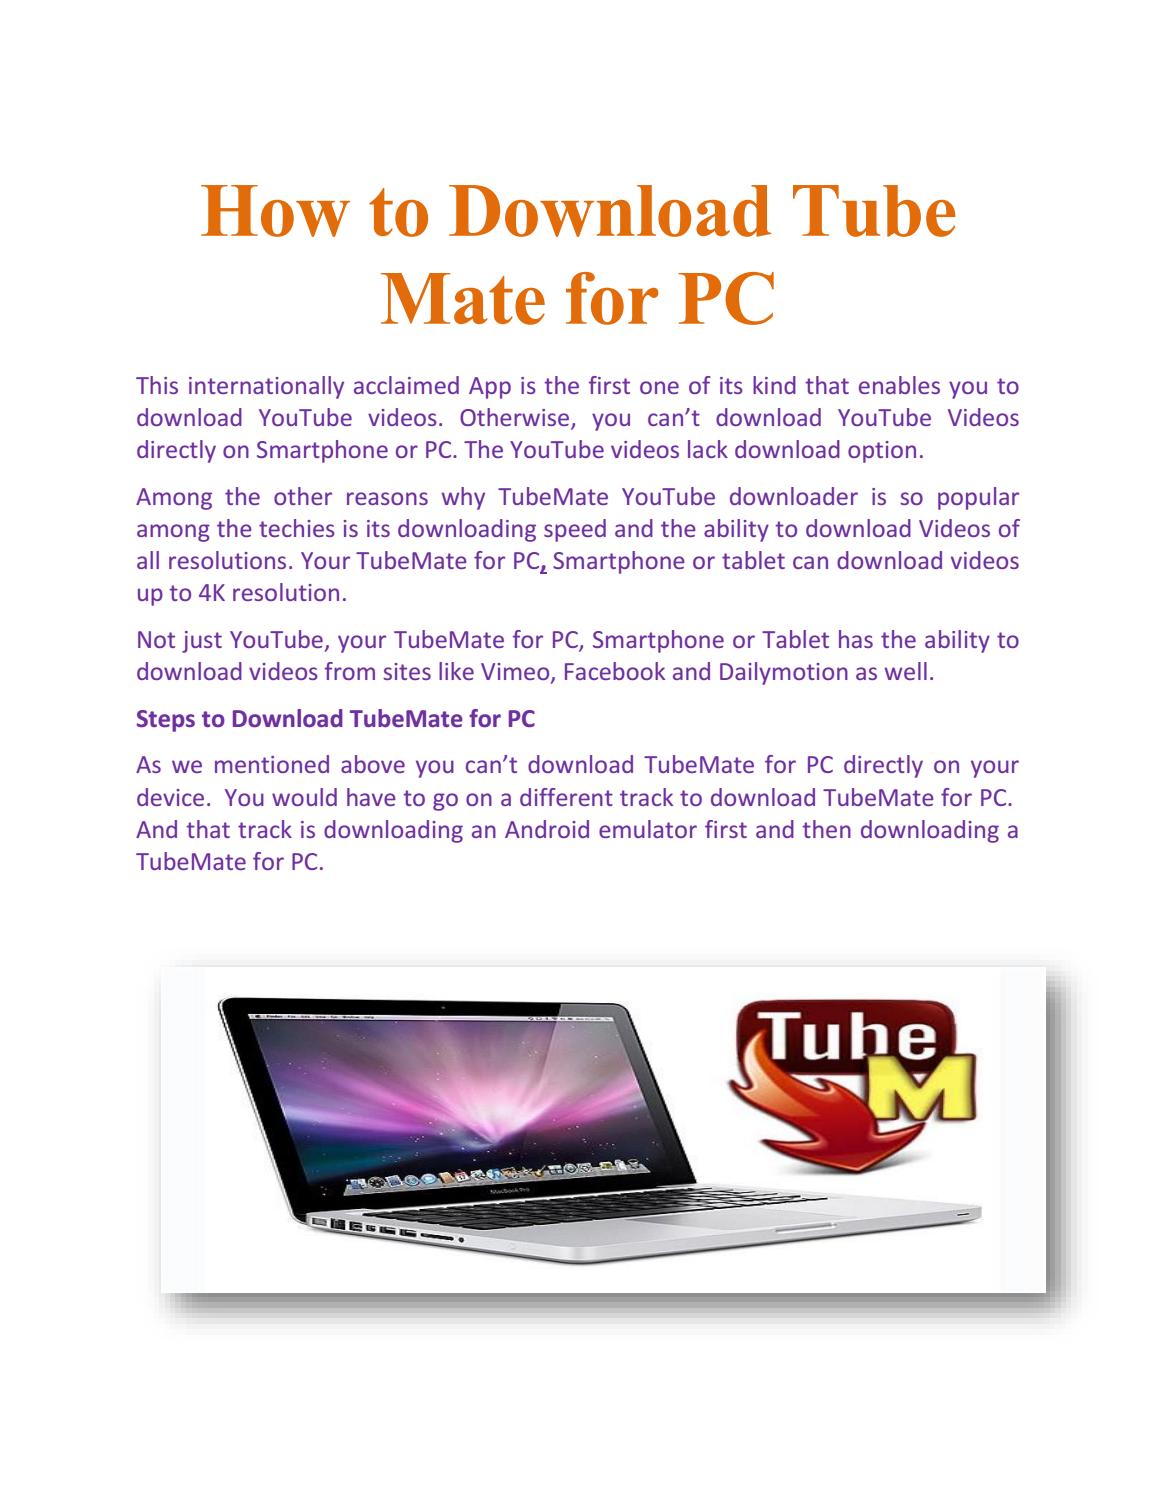 tubemate downloader for android 4.4.4